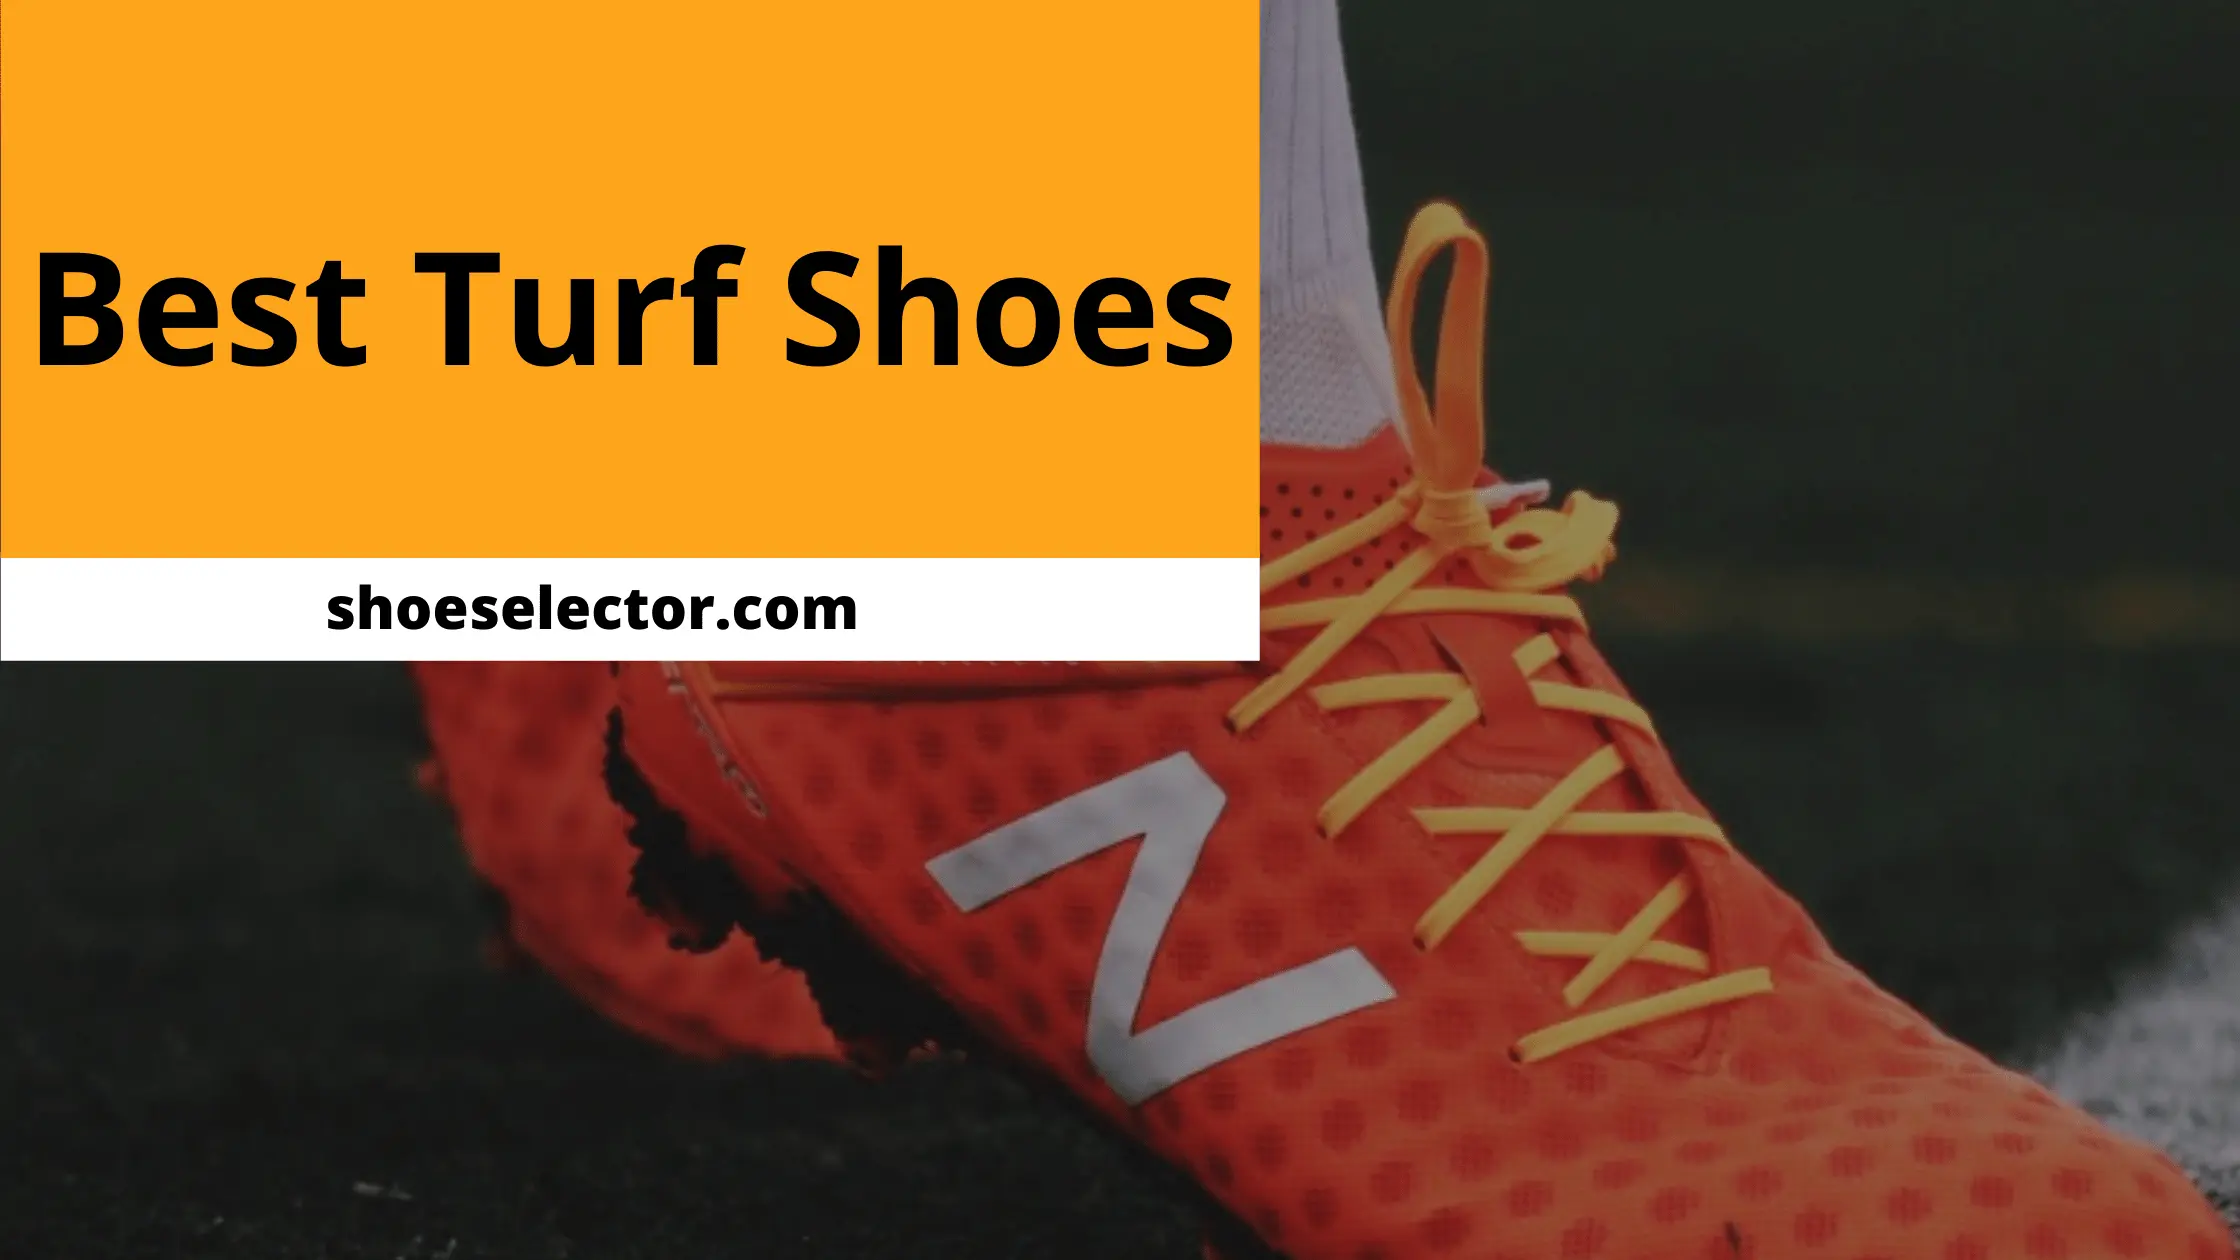 Best Turf Shoes - Complete Buying Guides